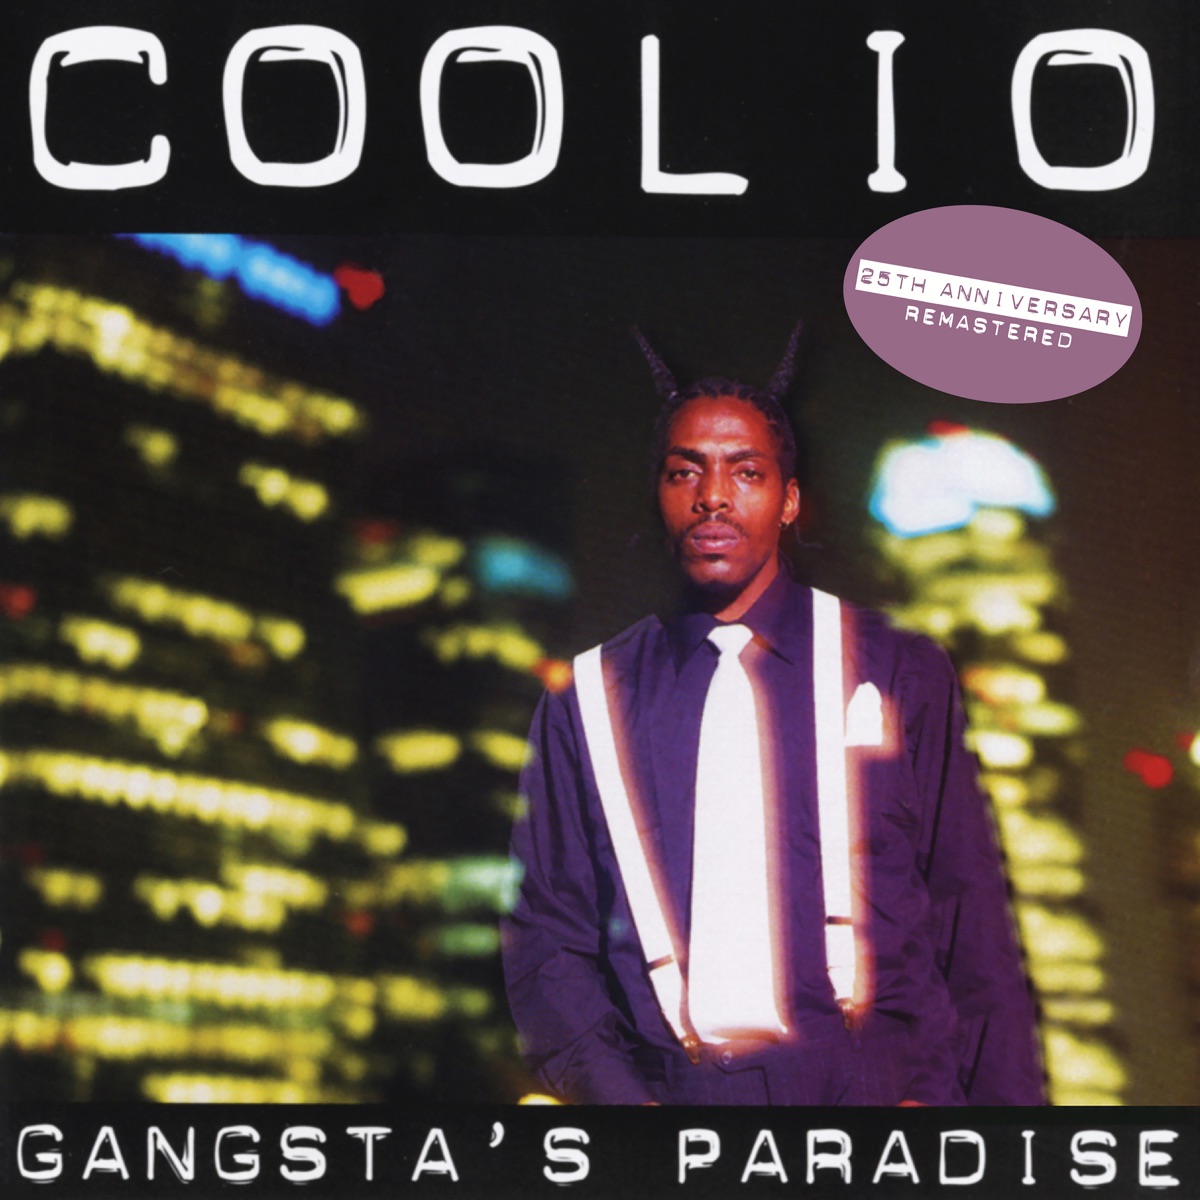 Coolio - Gangsta's Paradise (25th Anniversary - Remastered)